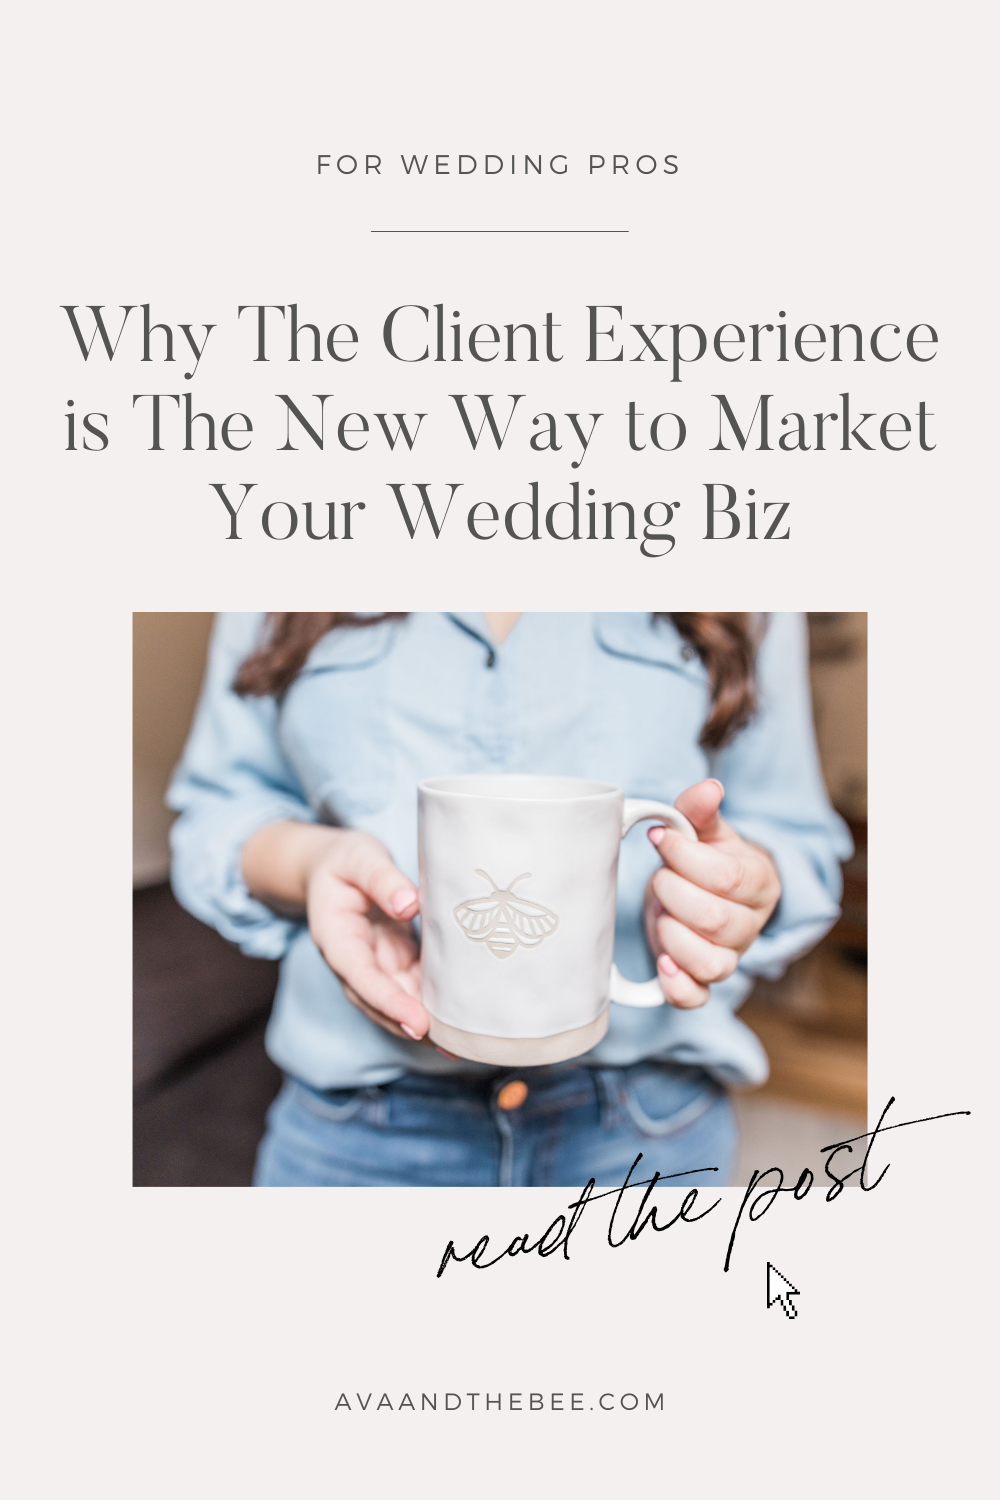 Why the client experience is important when marketing your wedding business.